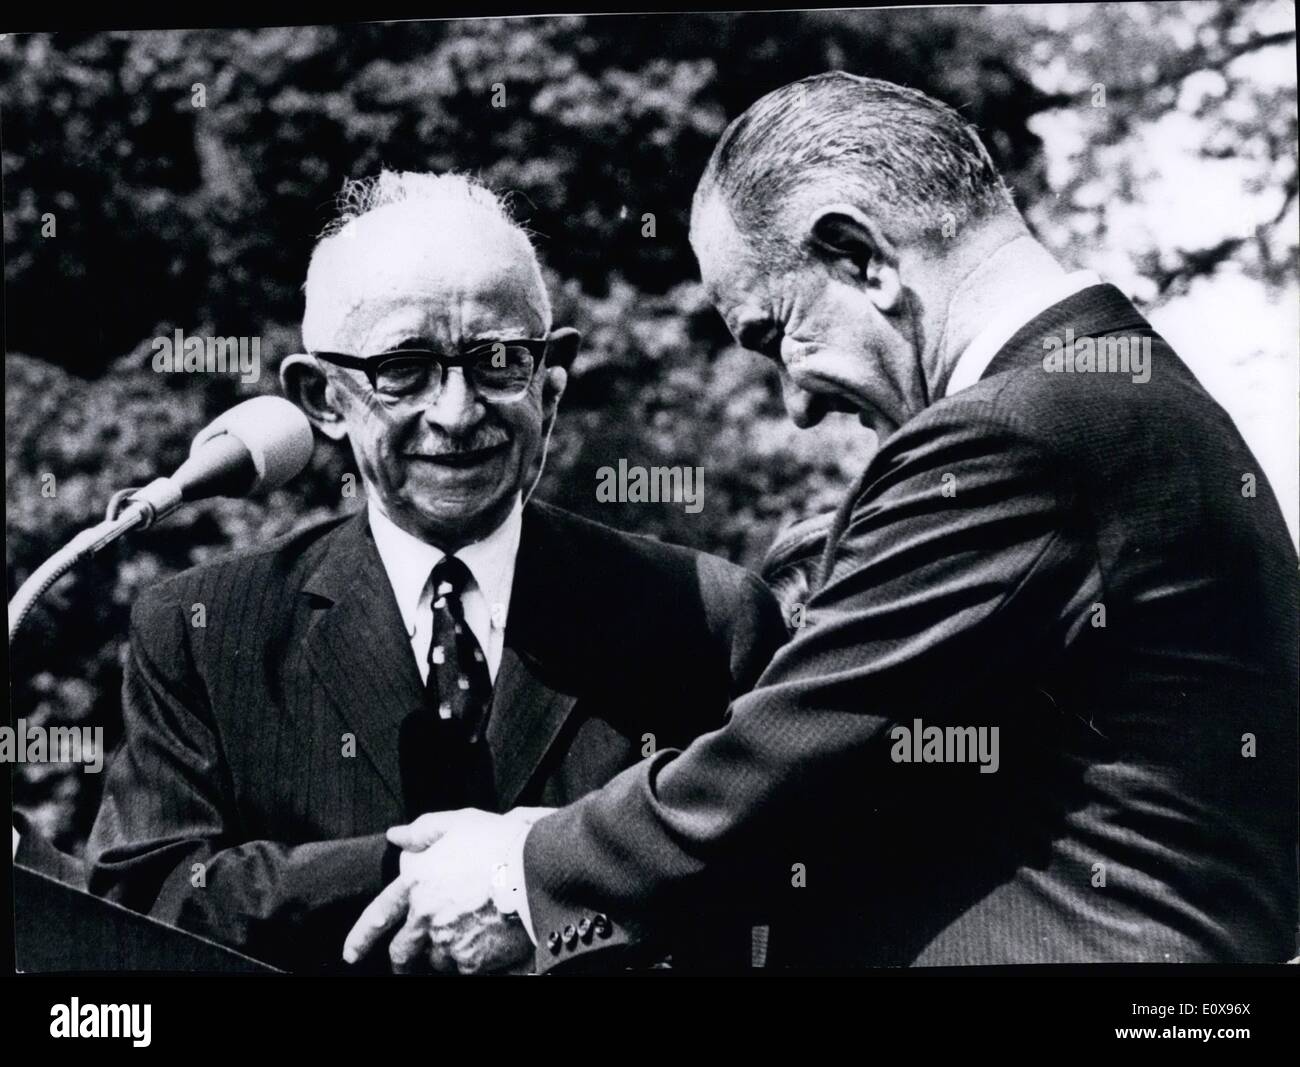 Oct. 10, 1965 - Ismet Inonu with President Johnson in Washington Ã¢â‚¬â€œ The oldest politician in Turkey, leader of the oldest Stock Photo